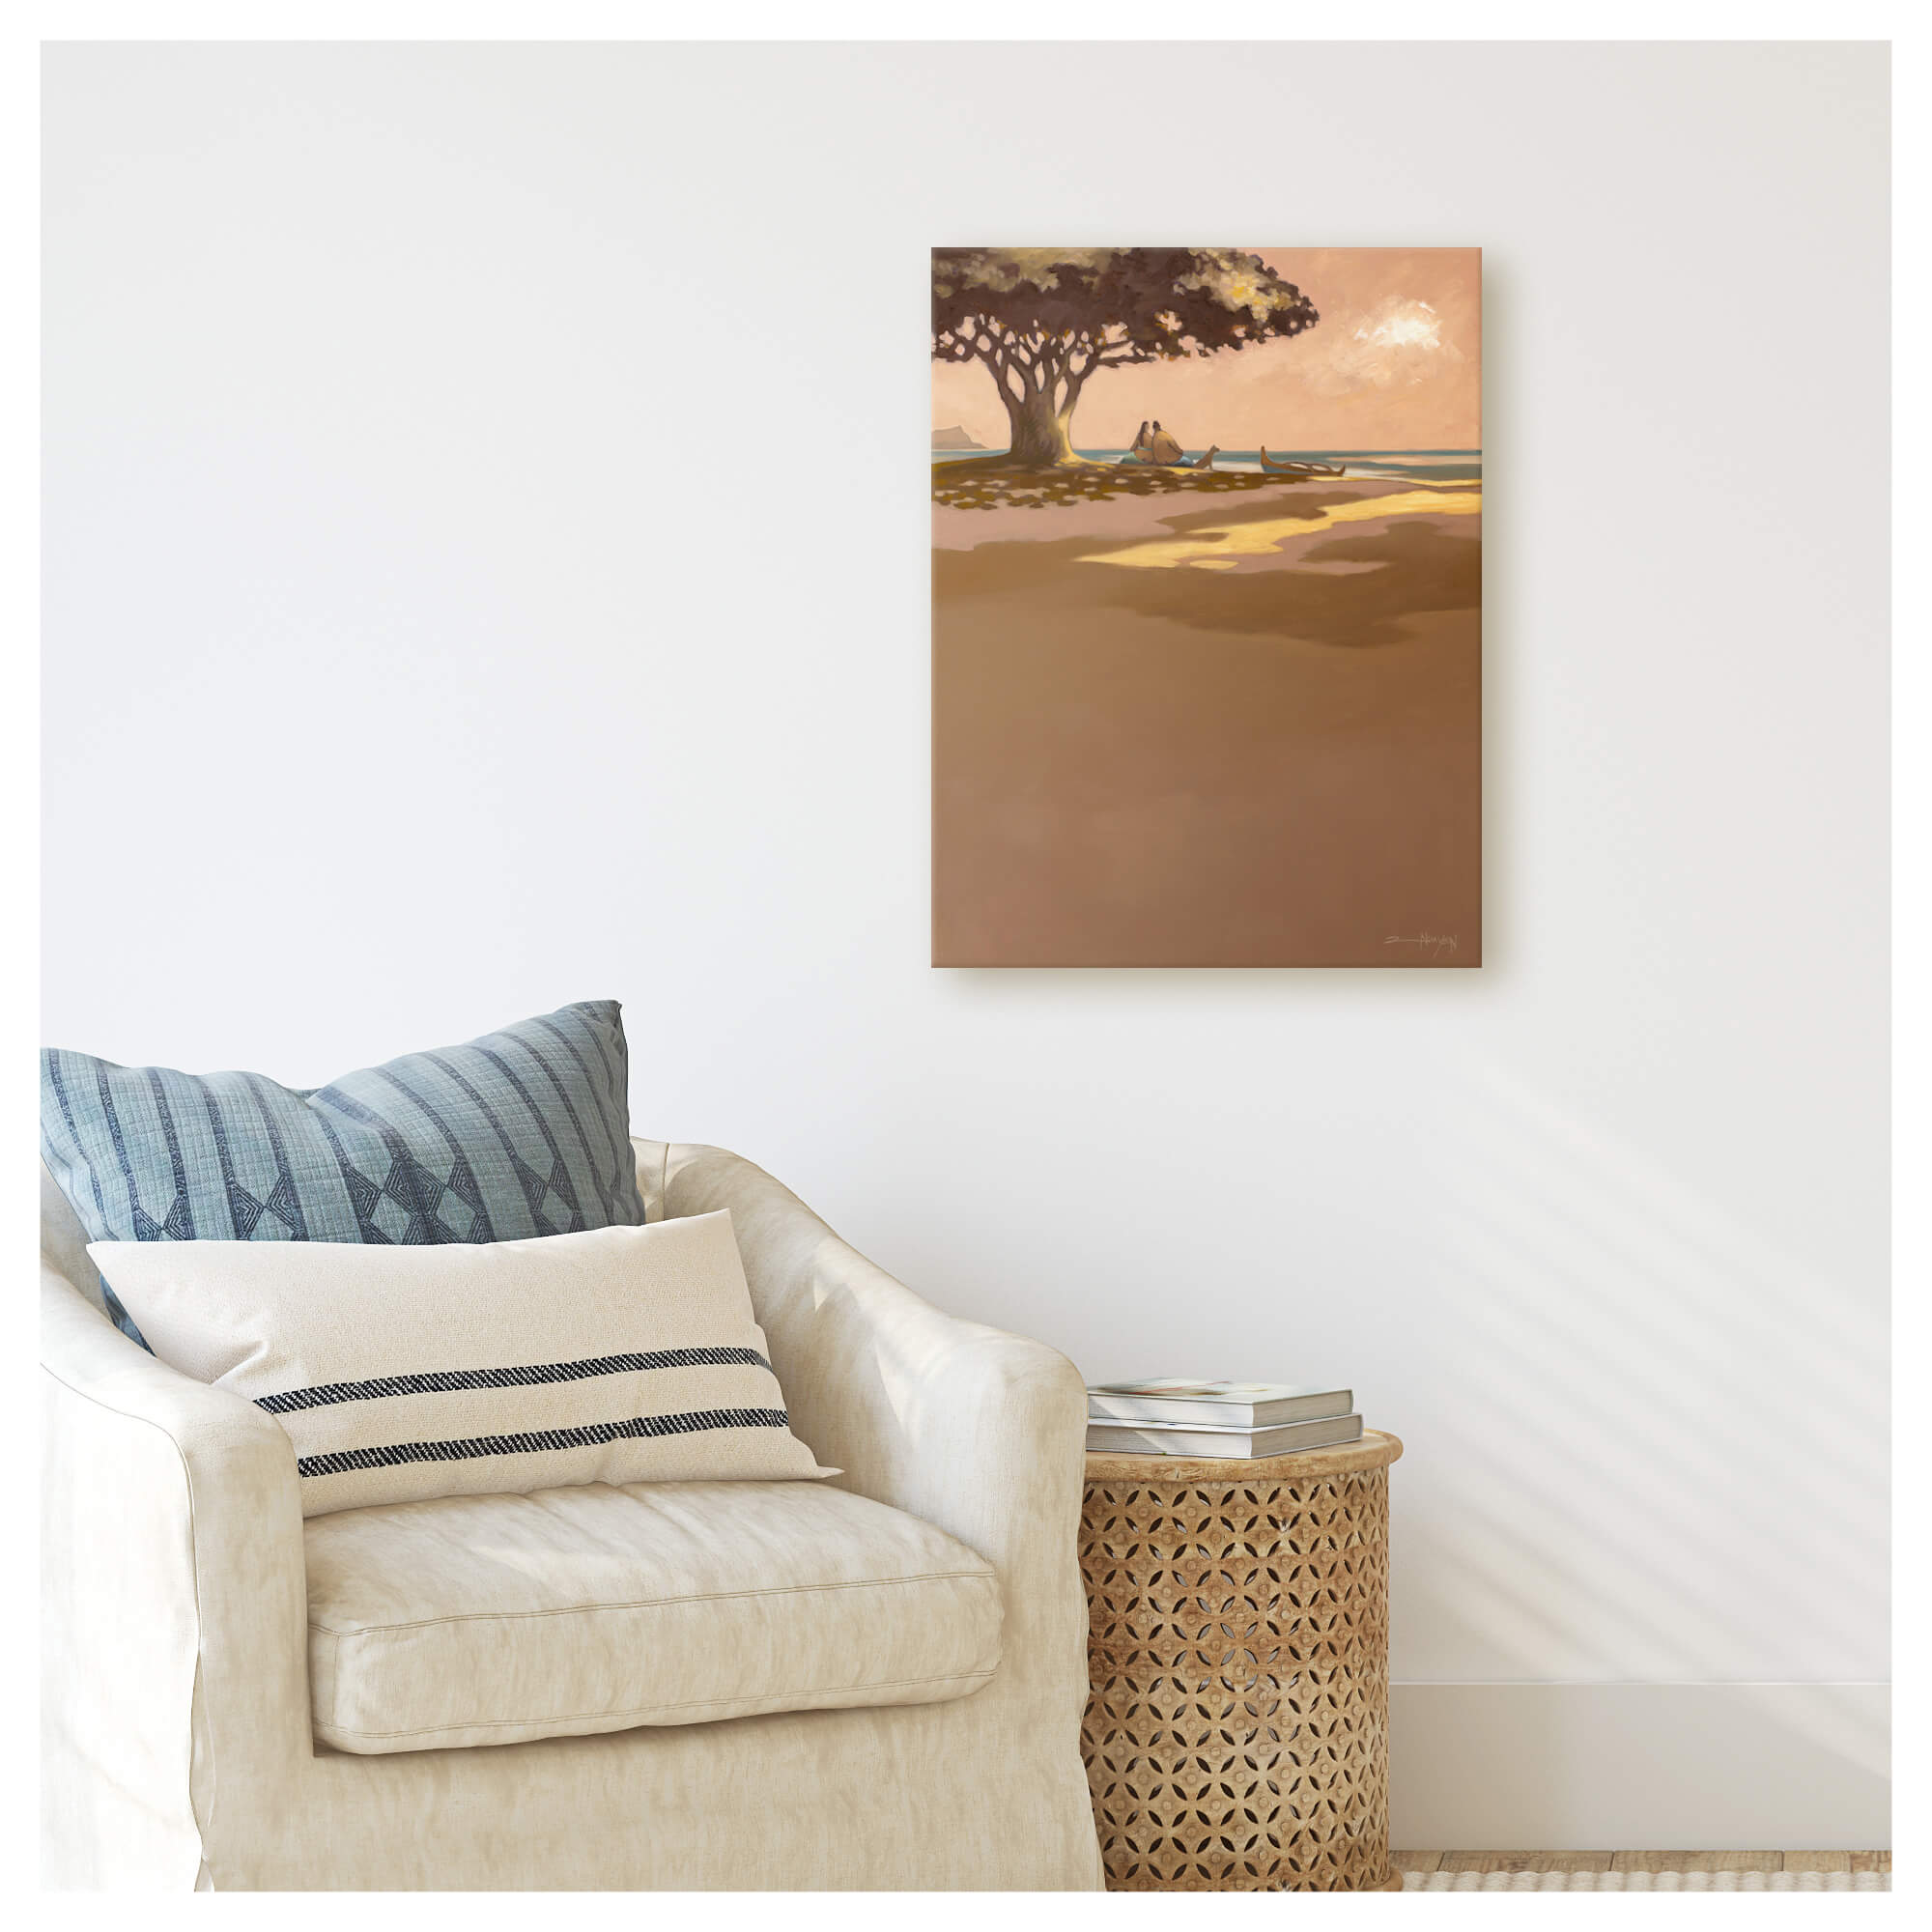 A canvas art print of a couple enjoying the sunset view at the beach under a tree by Hawaii artist Tim Nguyen